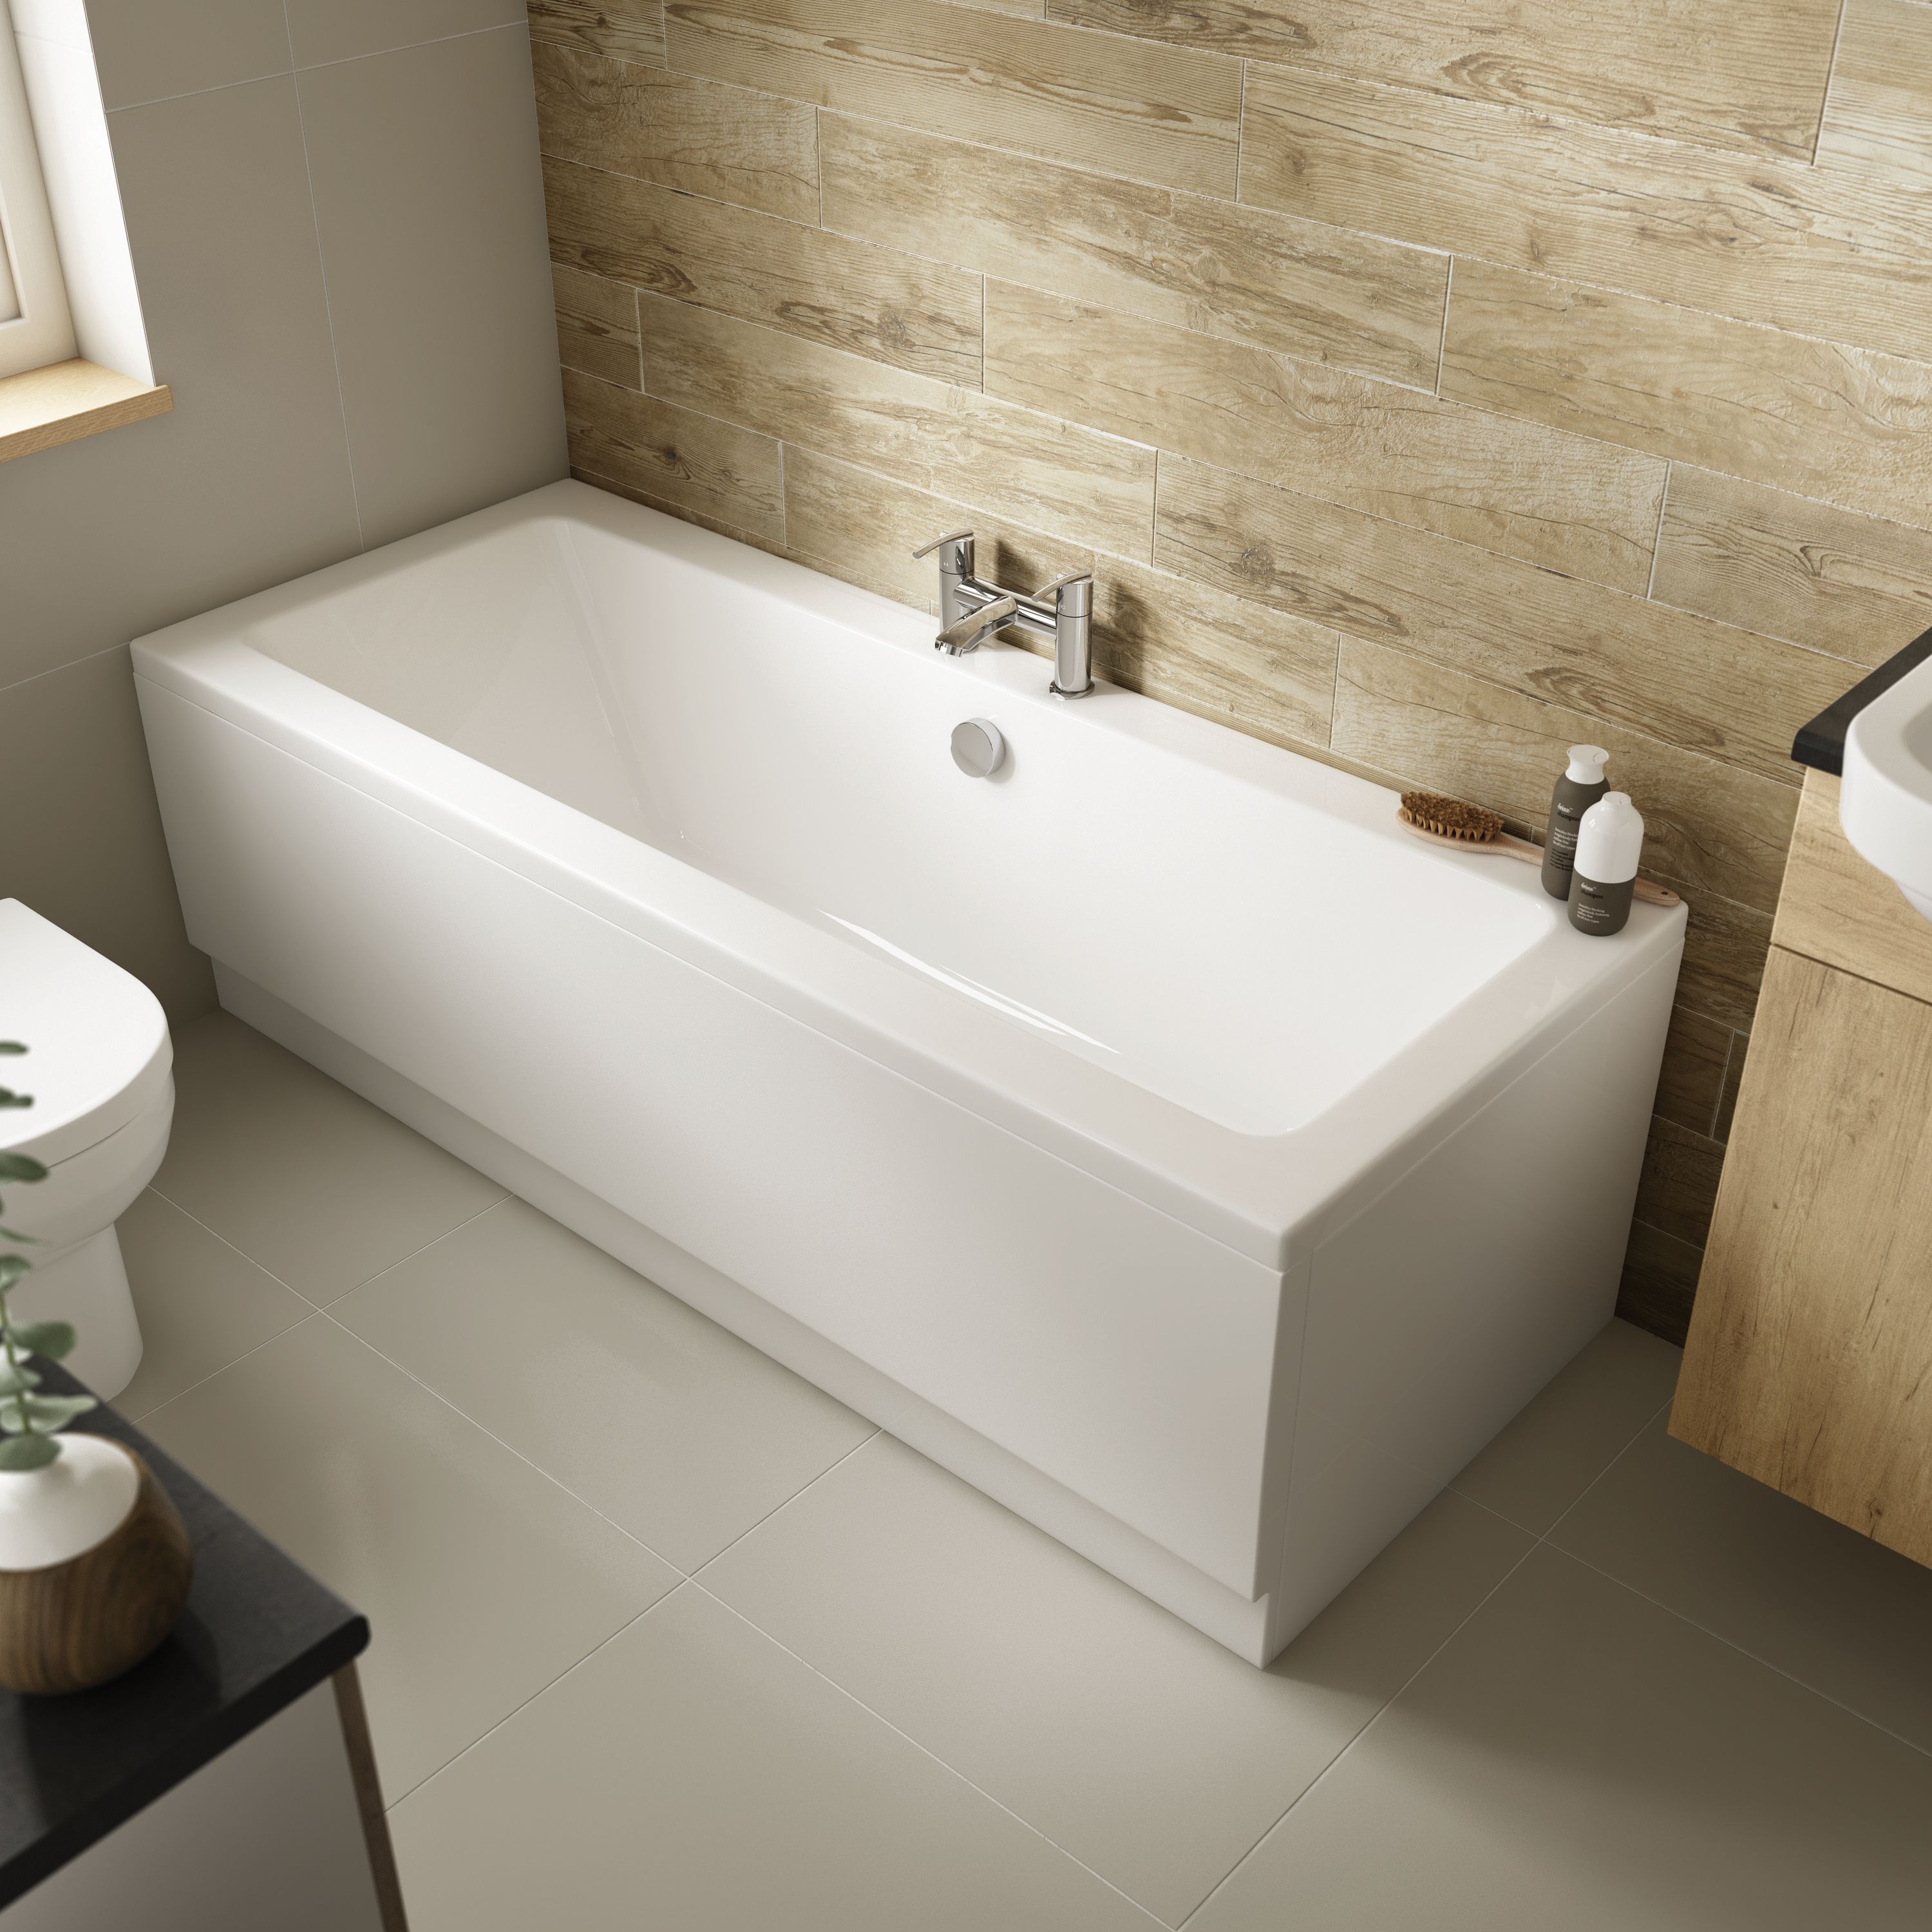 Image of Wickes Camisa Double Ended Bath - 1700mm